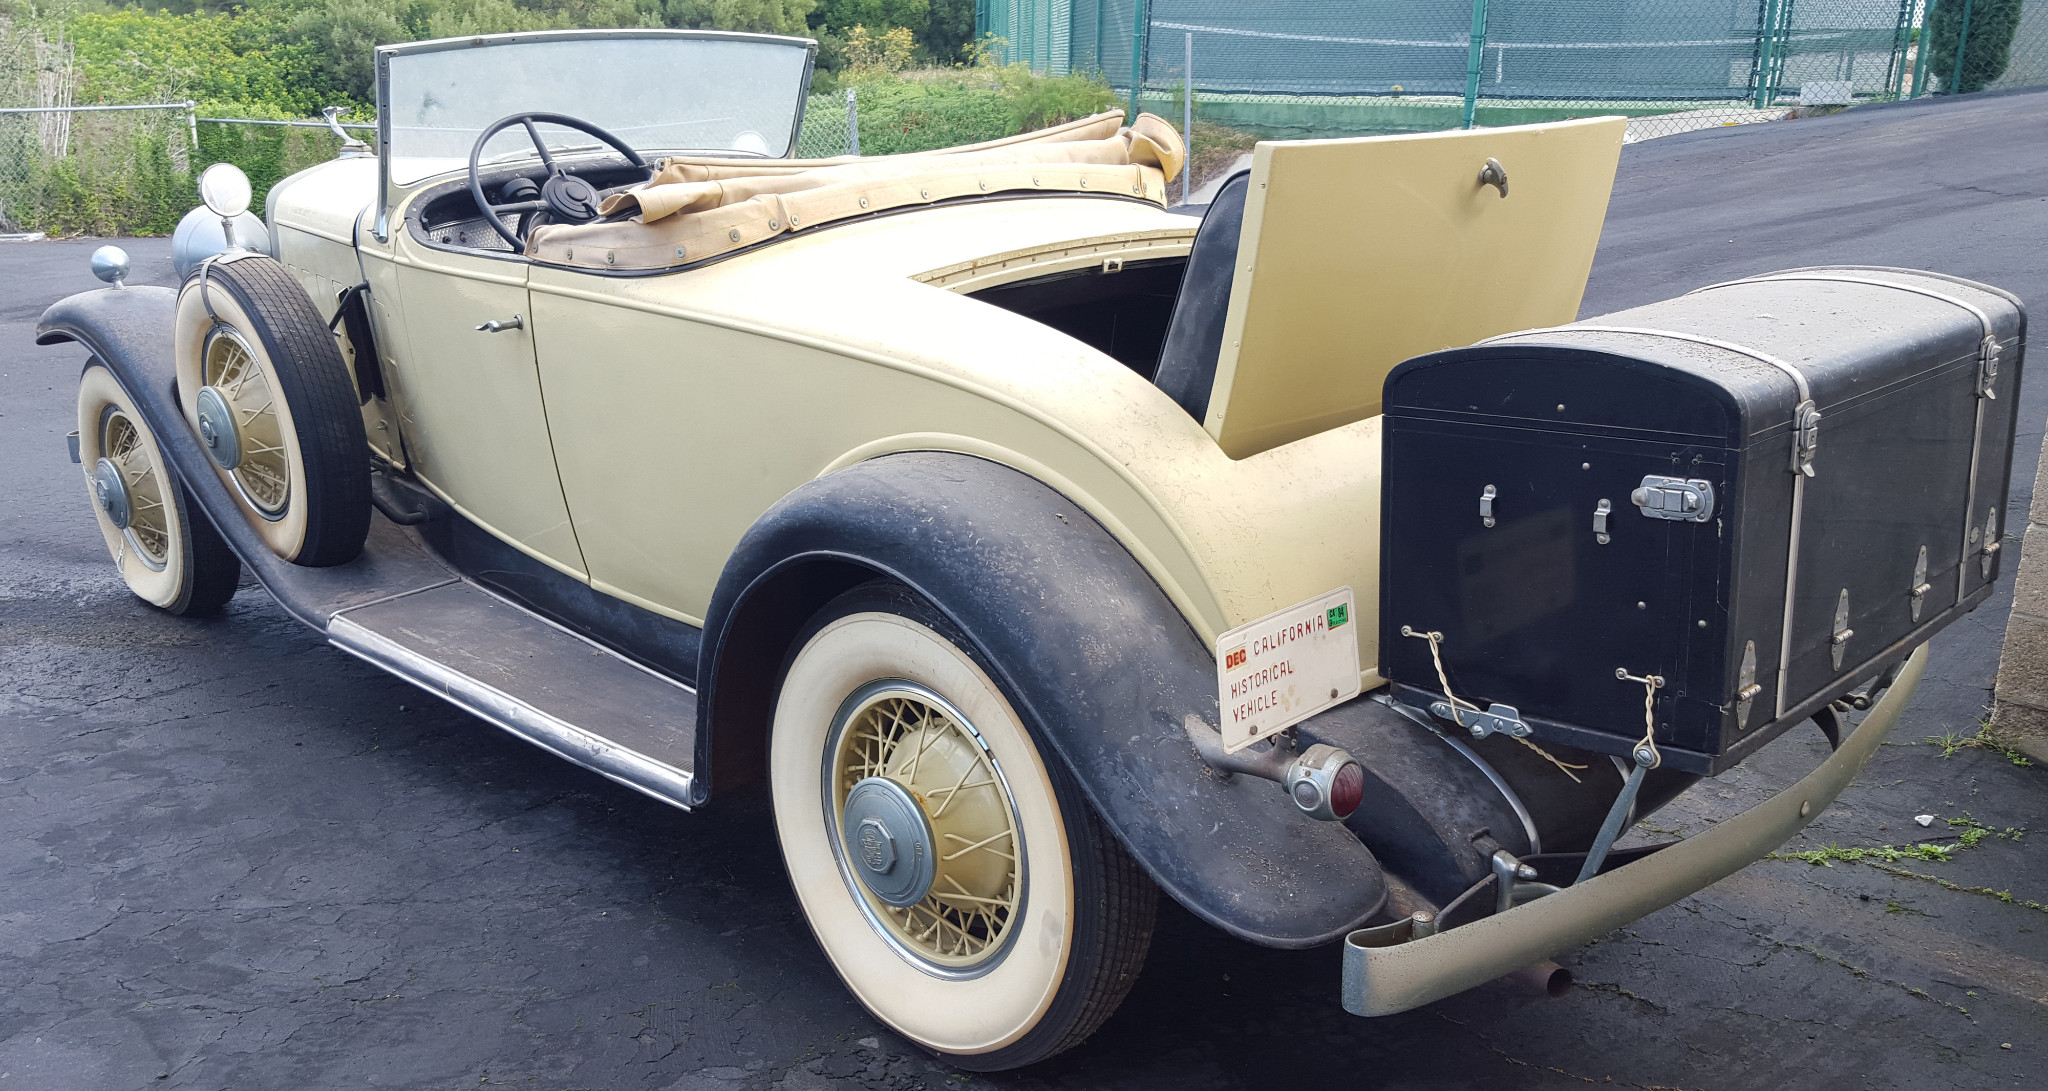 This Cadillac features a rumble seat, storage compartment for golf clubs and a trunk. (Picture courtesy bringatrailer.com).